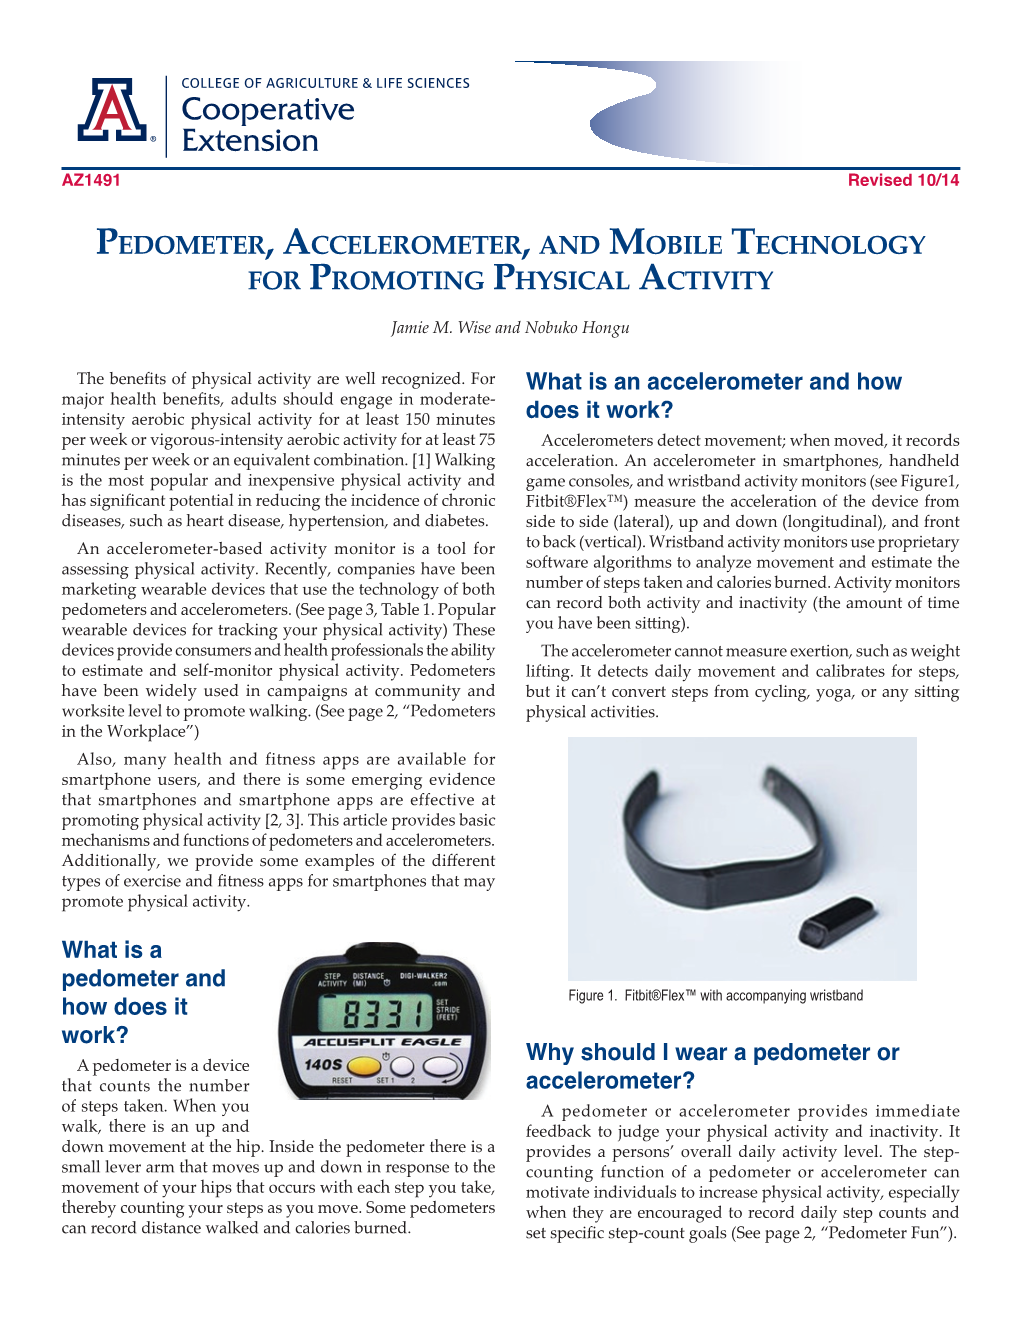 Pedometer, Accelerometer, and Mobile Technology for Promoting Physical Activity